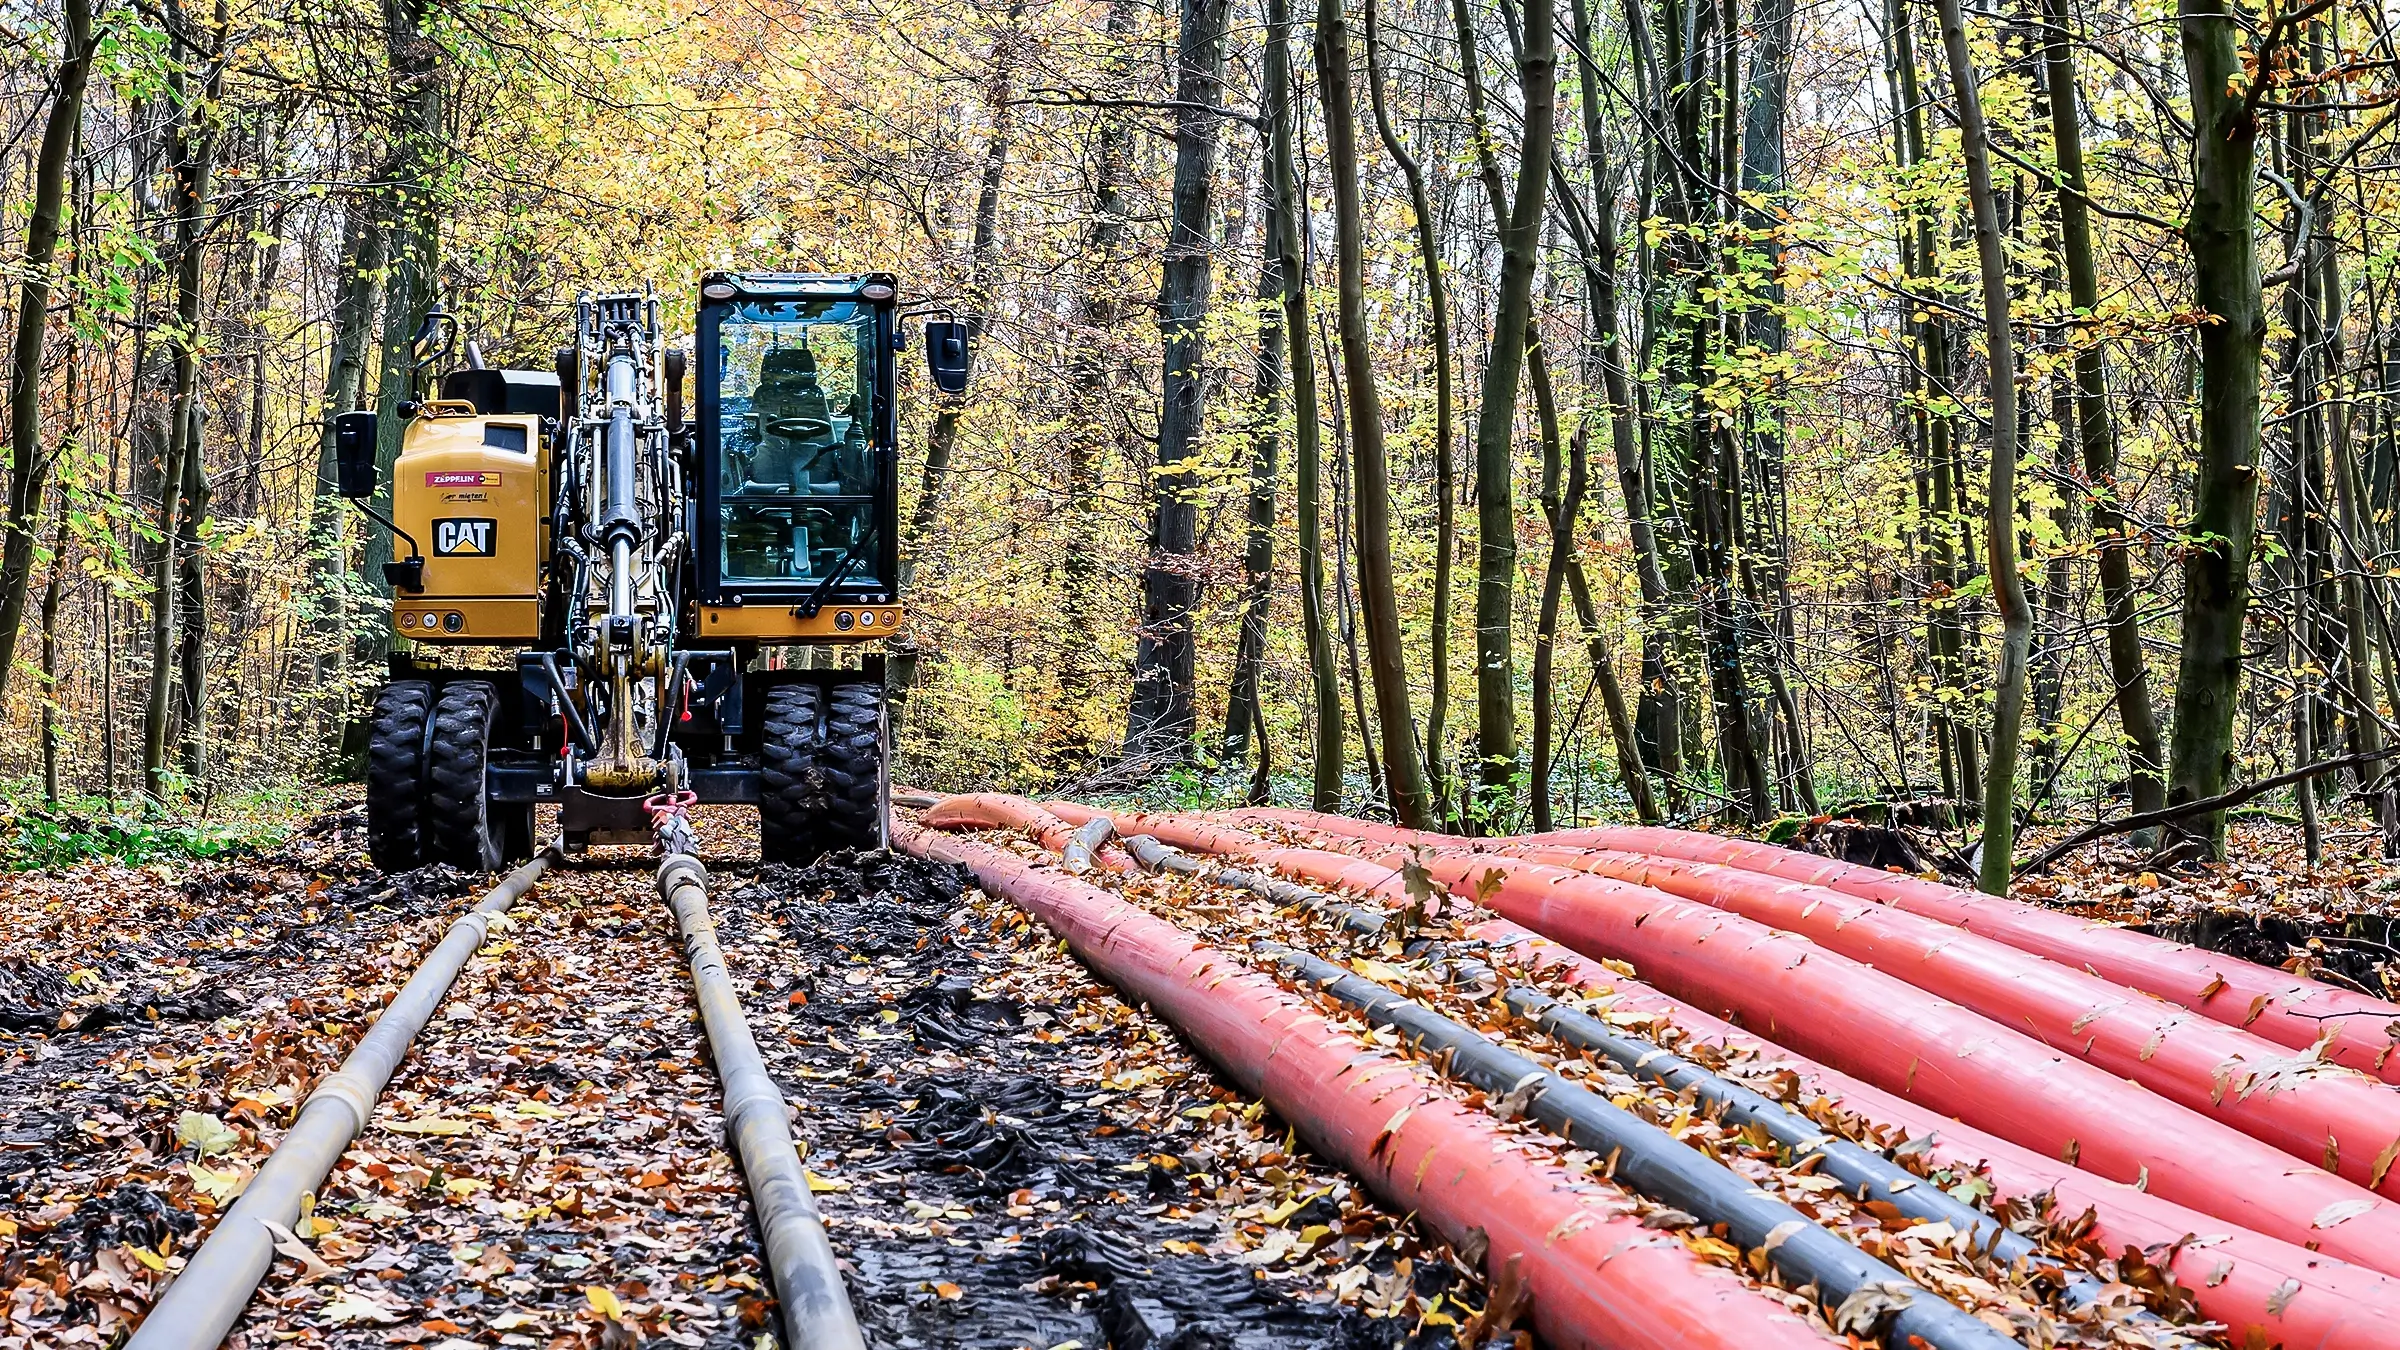 Equipment pulling cables through a rural wooded area.